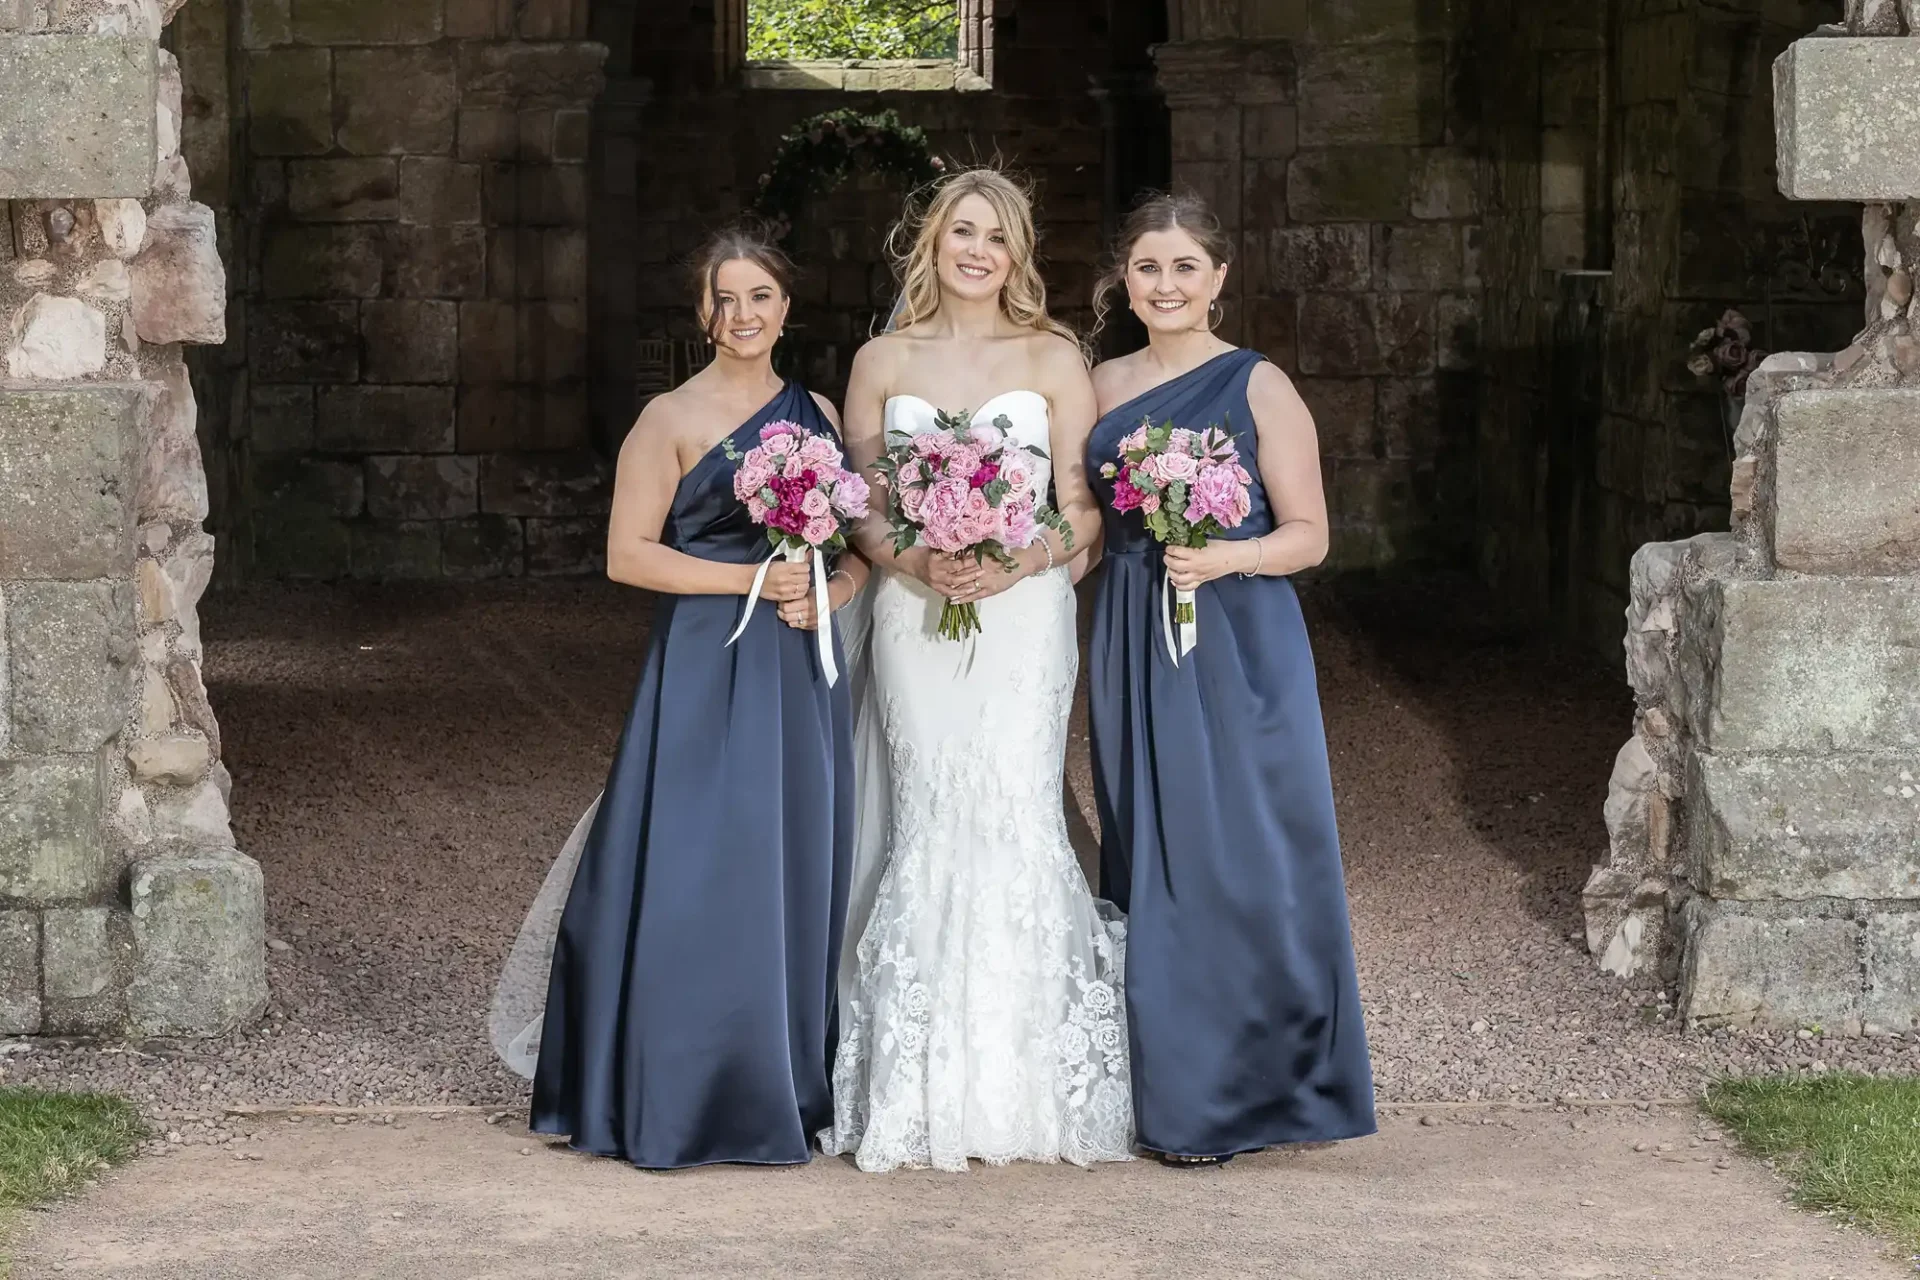 A bride in a white dress flanked by two bridesmaids in navy dresses, all holding pink bouquets, standing in a stone archway.